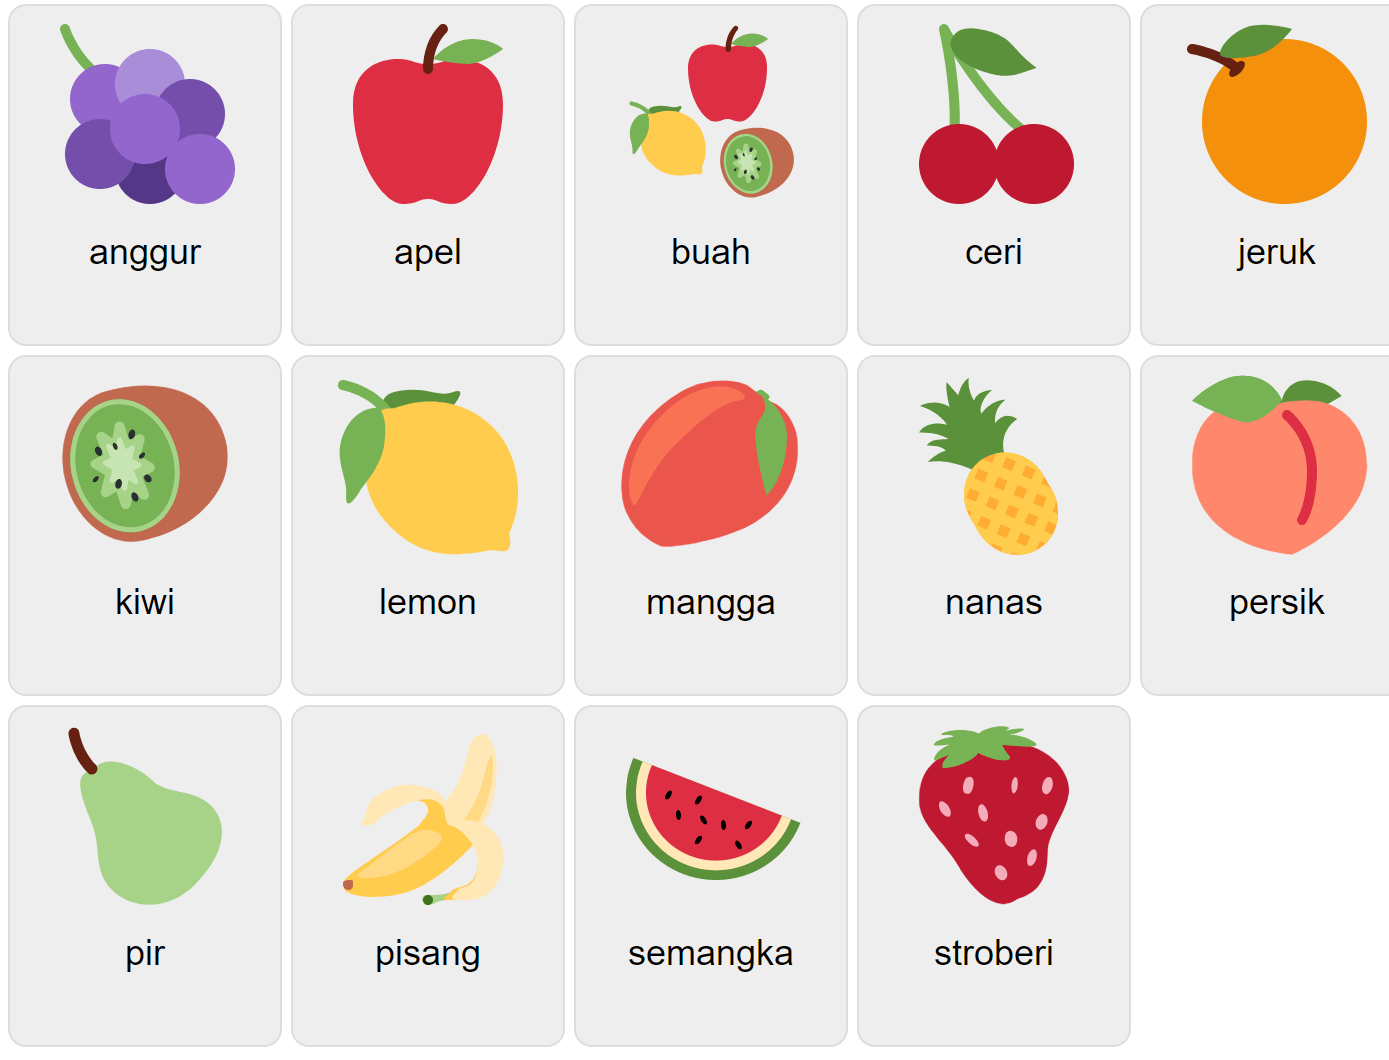 Fruits in Indonesian